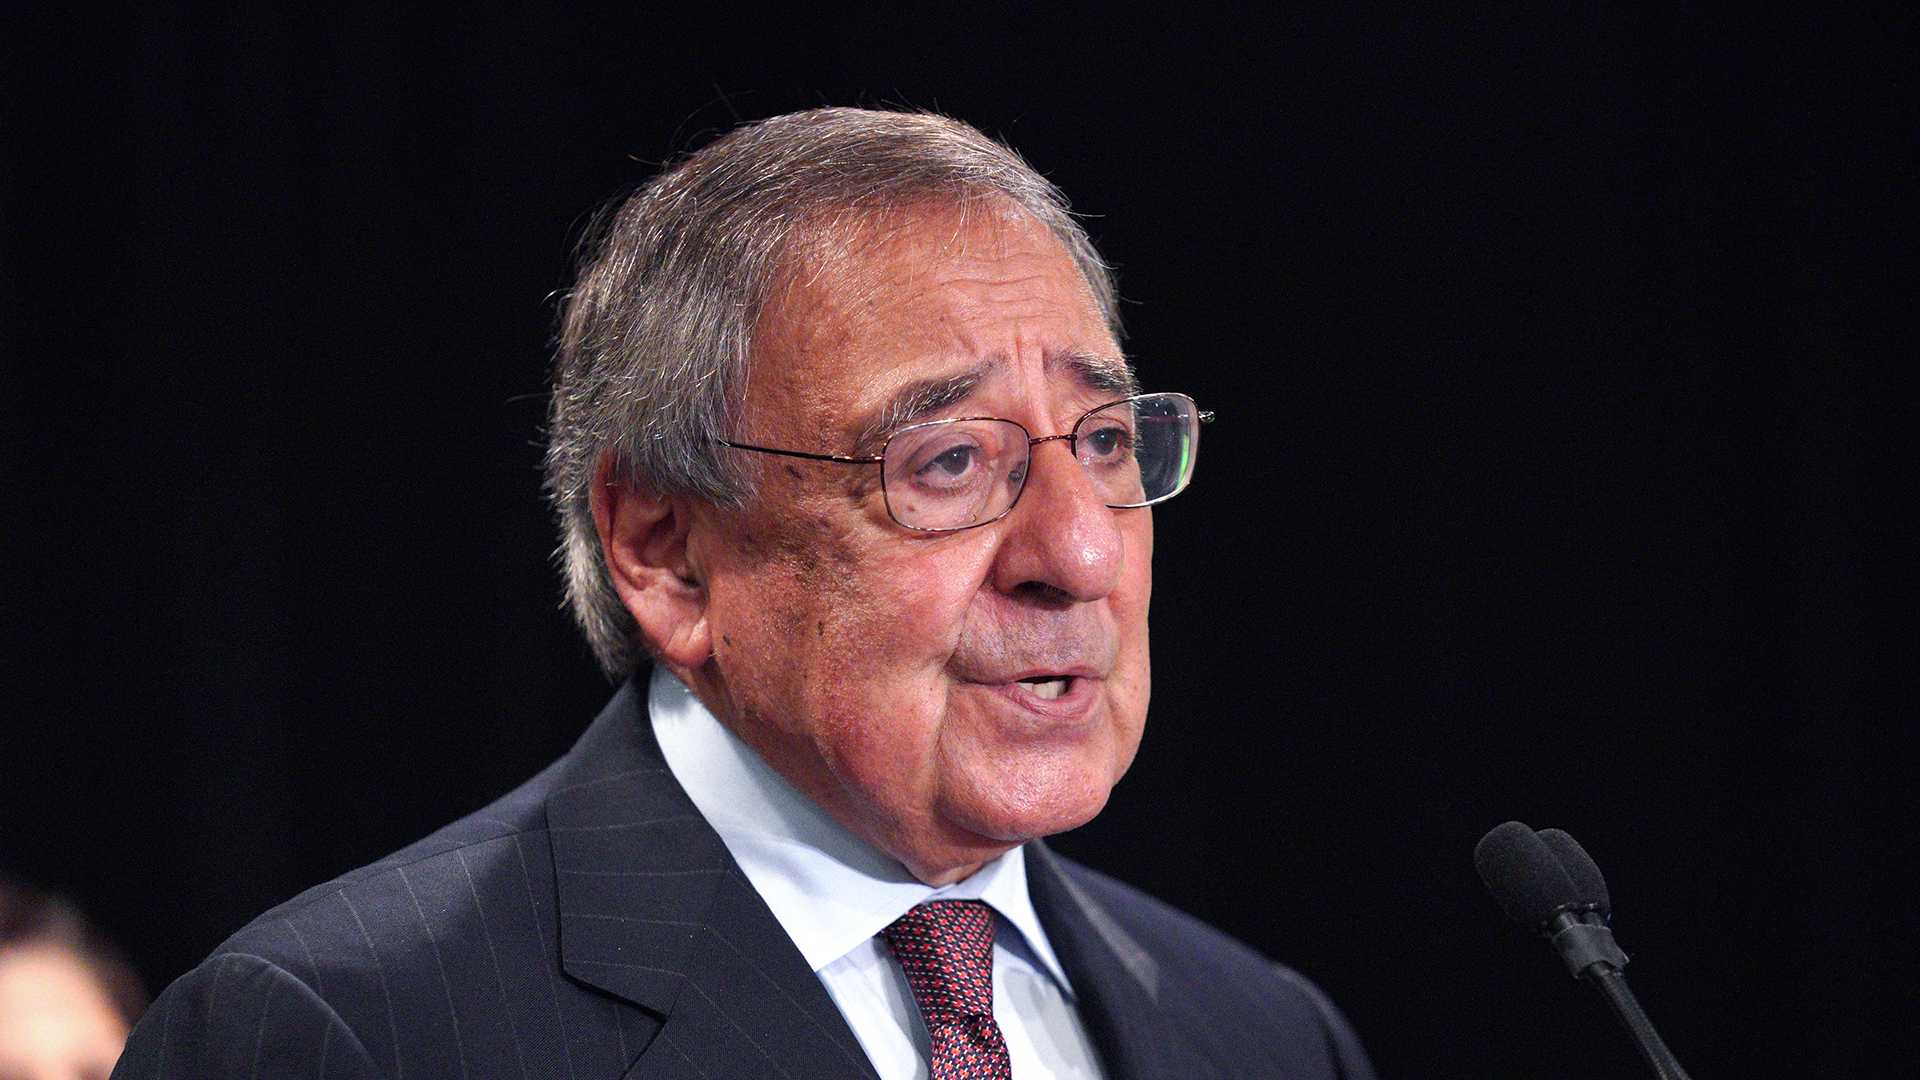 Former CIA Director and Defense Secretary Leon Panetta shares thoughts on Russia’s attack